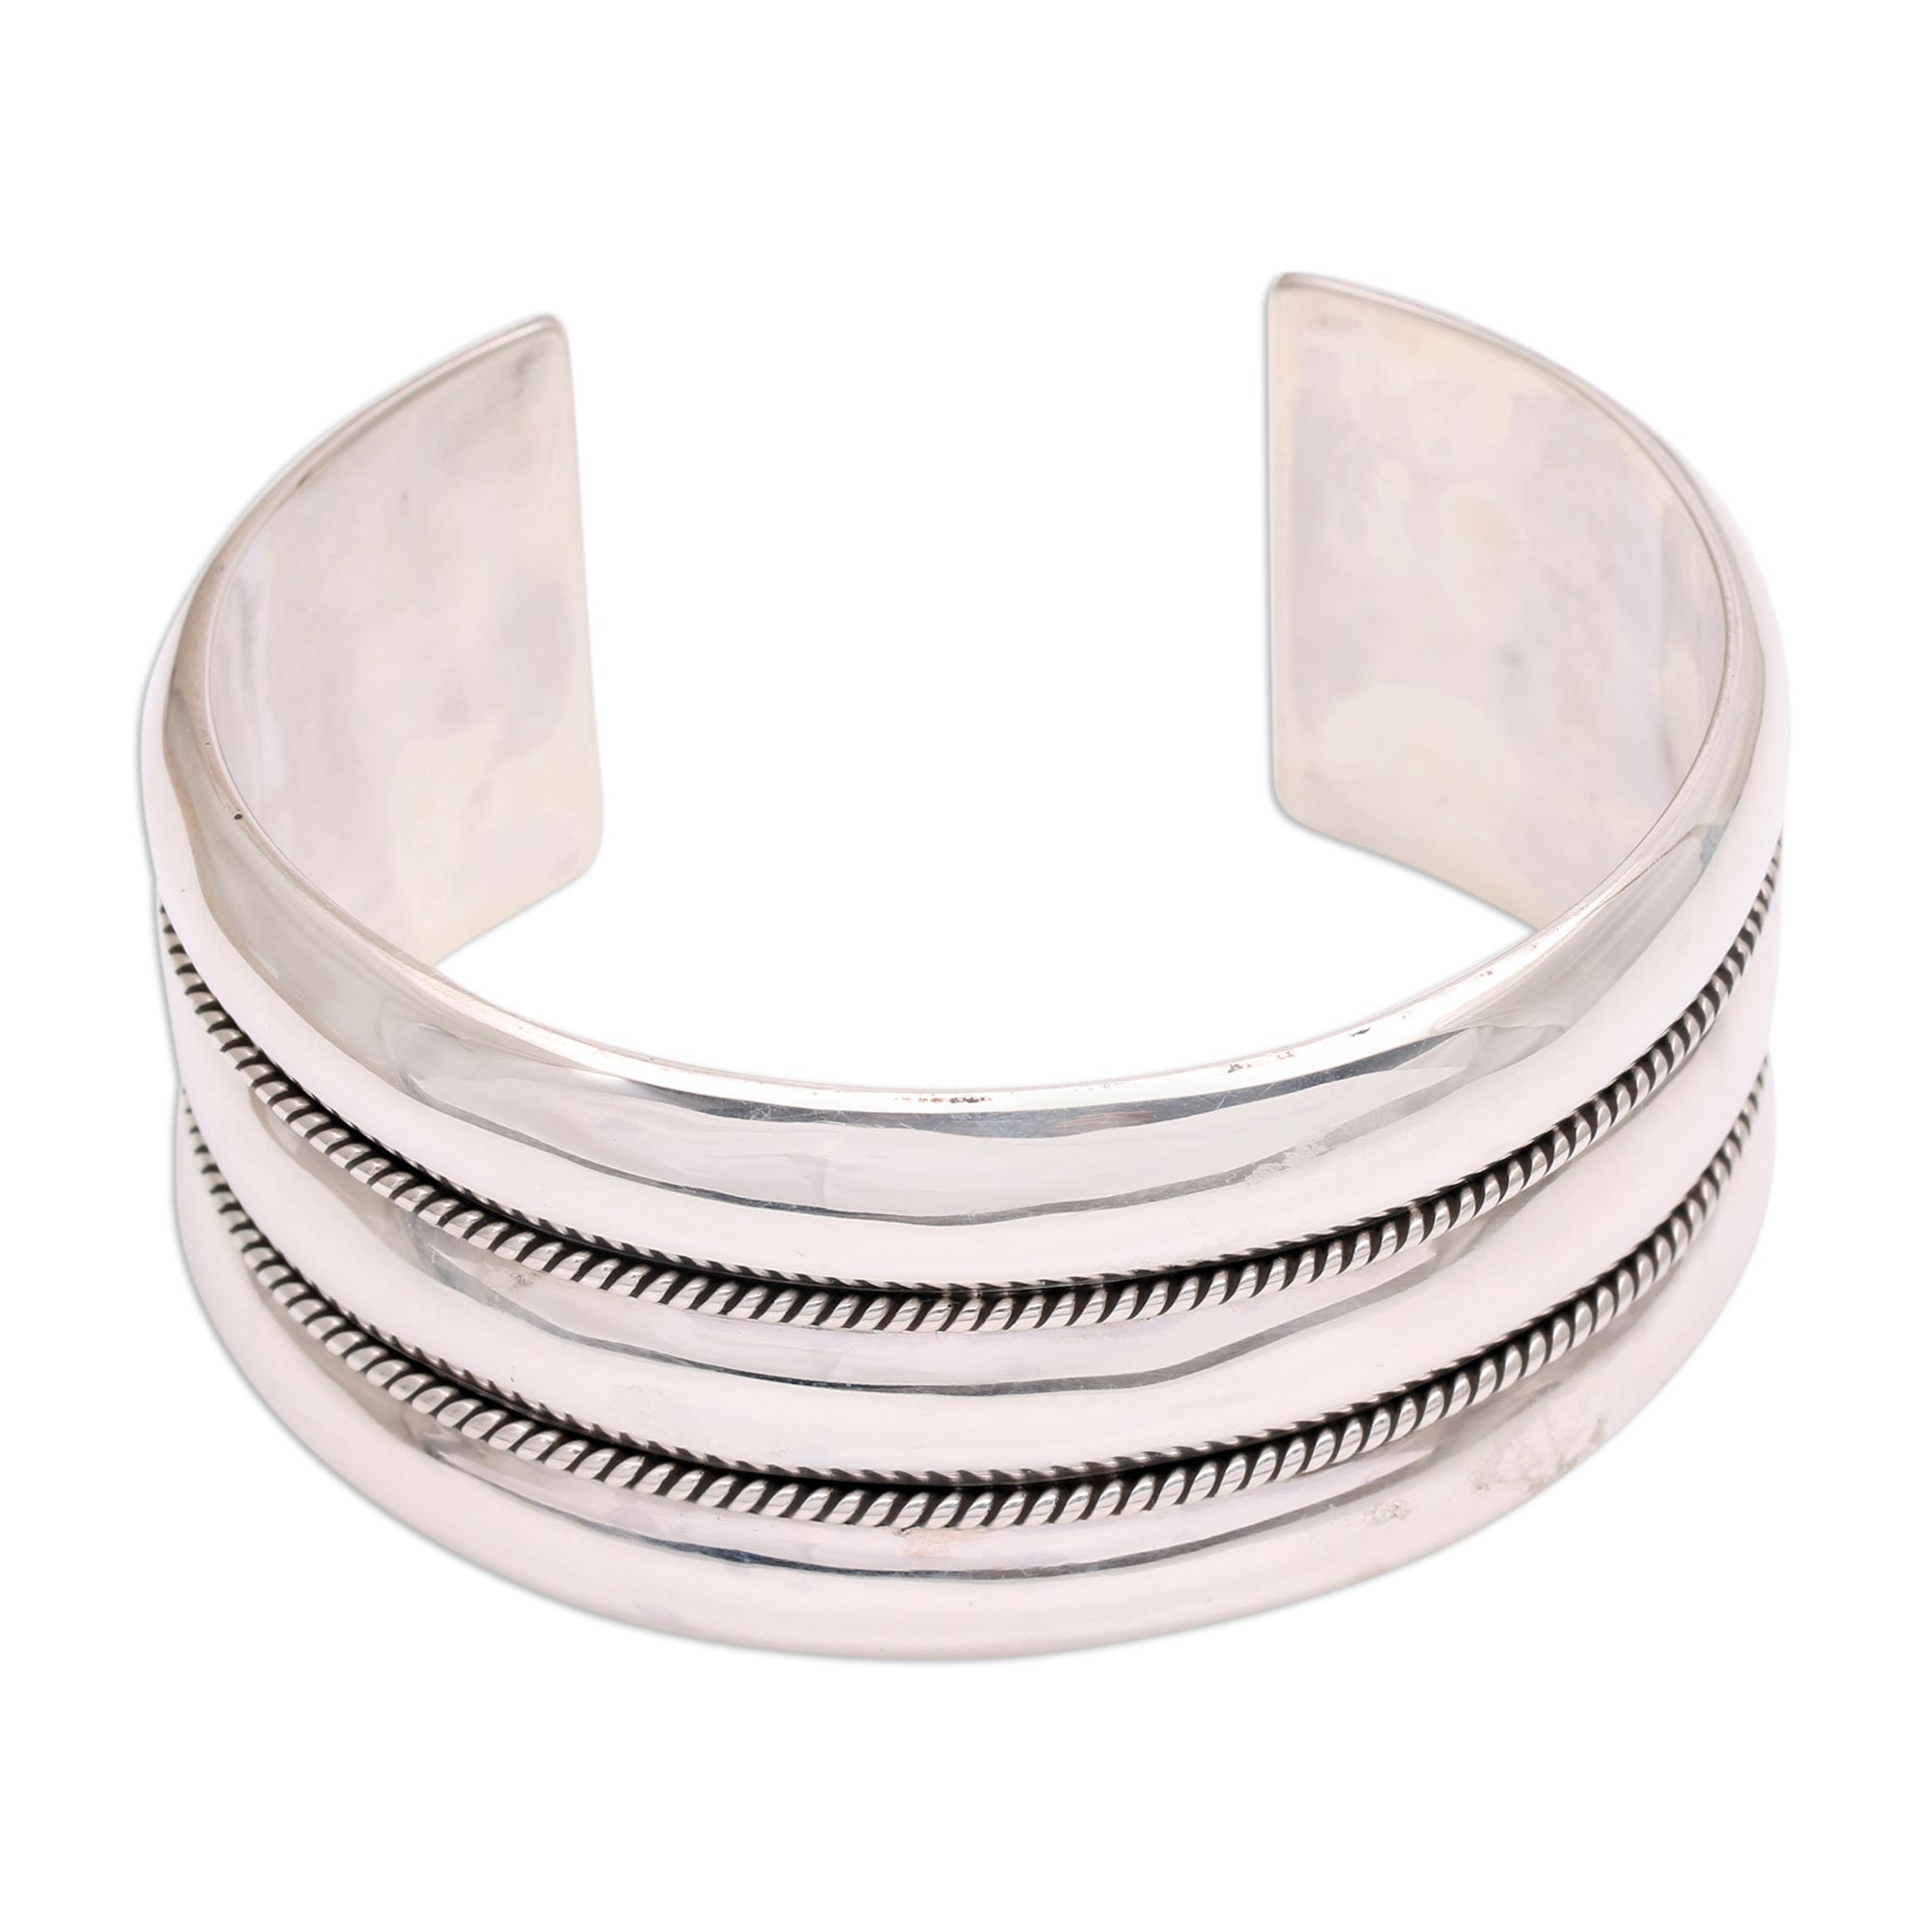 Chic Sterling Silver Cuff Bracelet Handmade in Bali - Ethereal Trinity ...